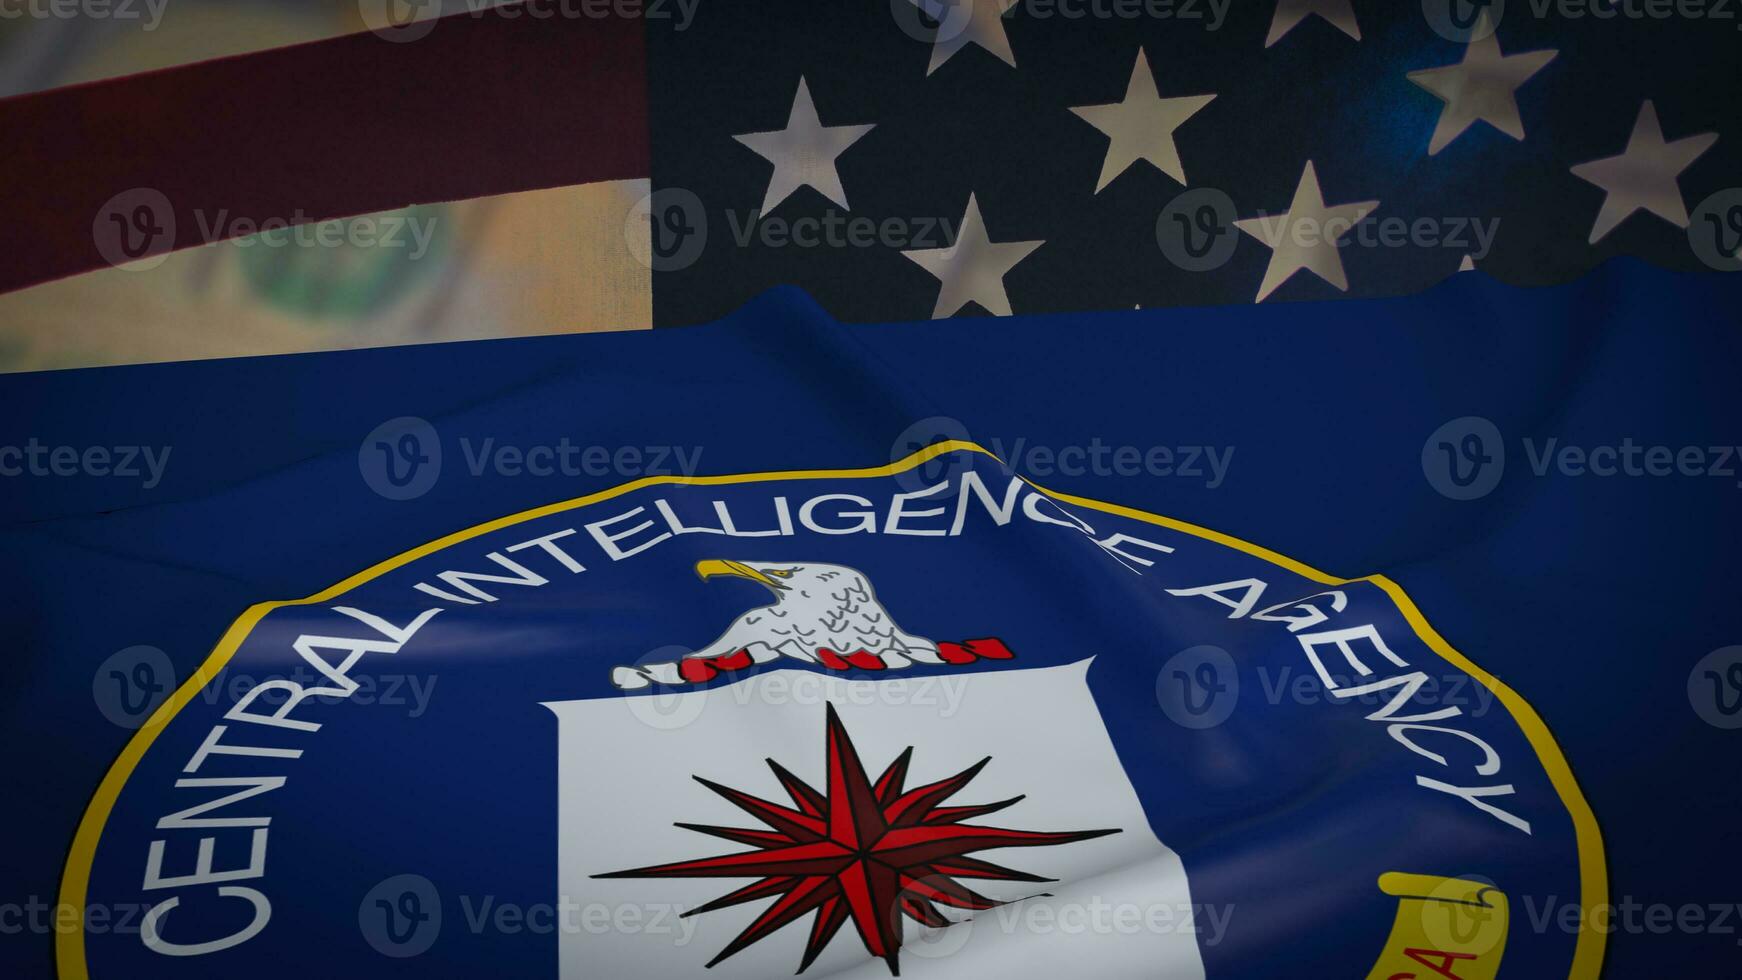 The  CIA or Central Intelligence Agency is the principal foreign intelligence agency of the United States government image 3d rendering photo